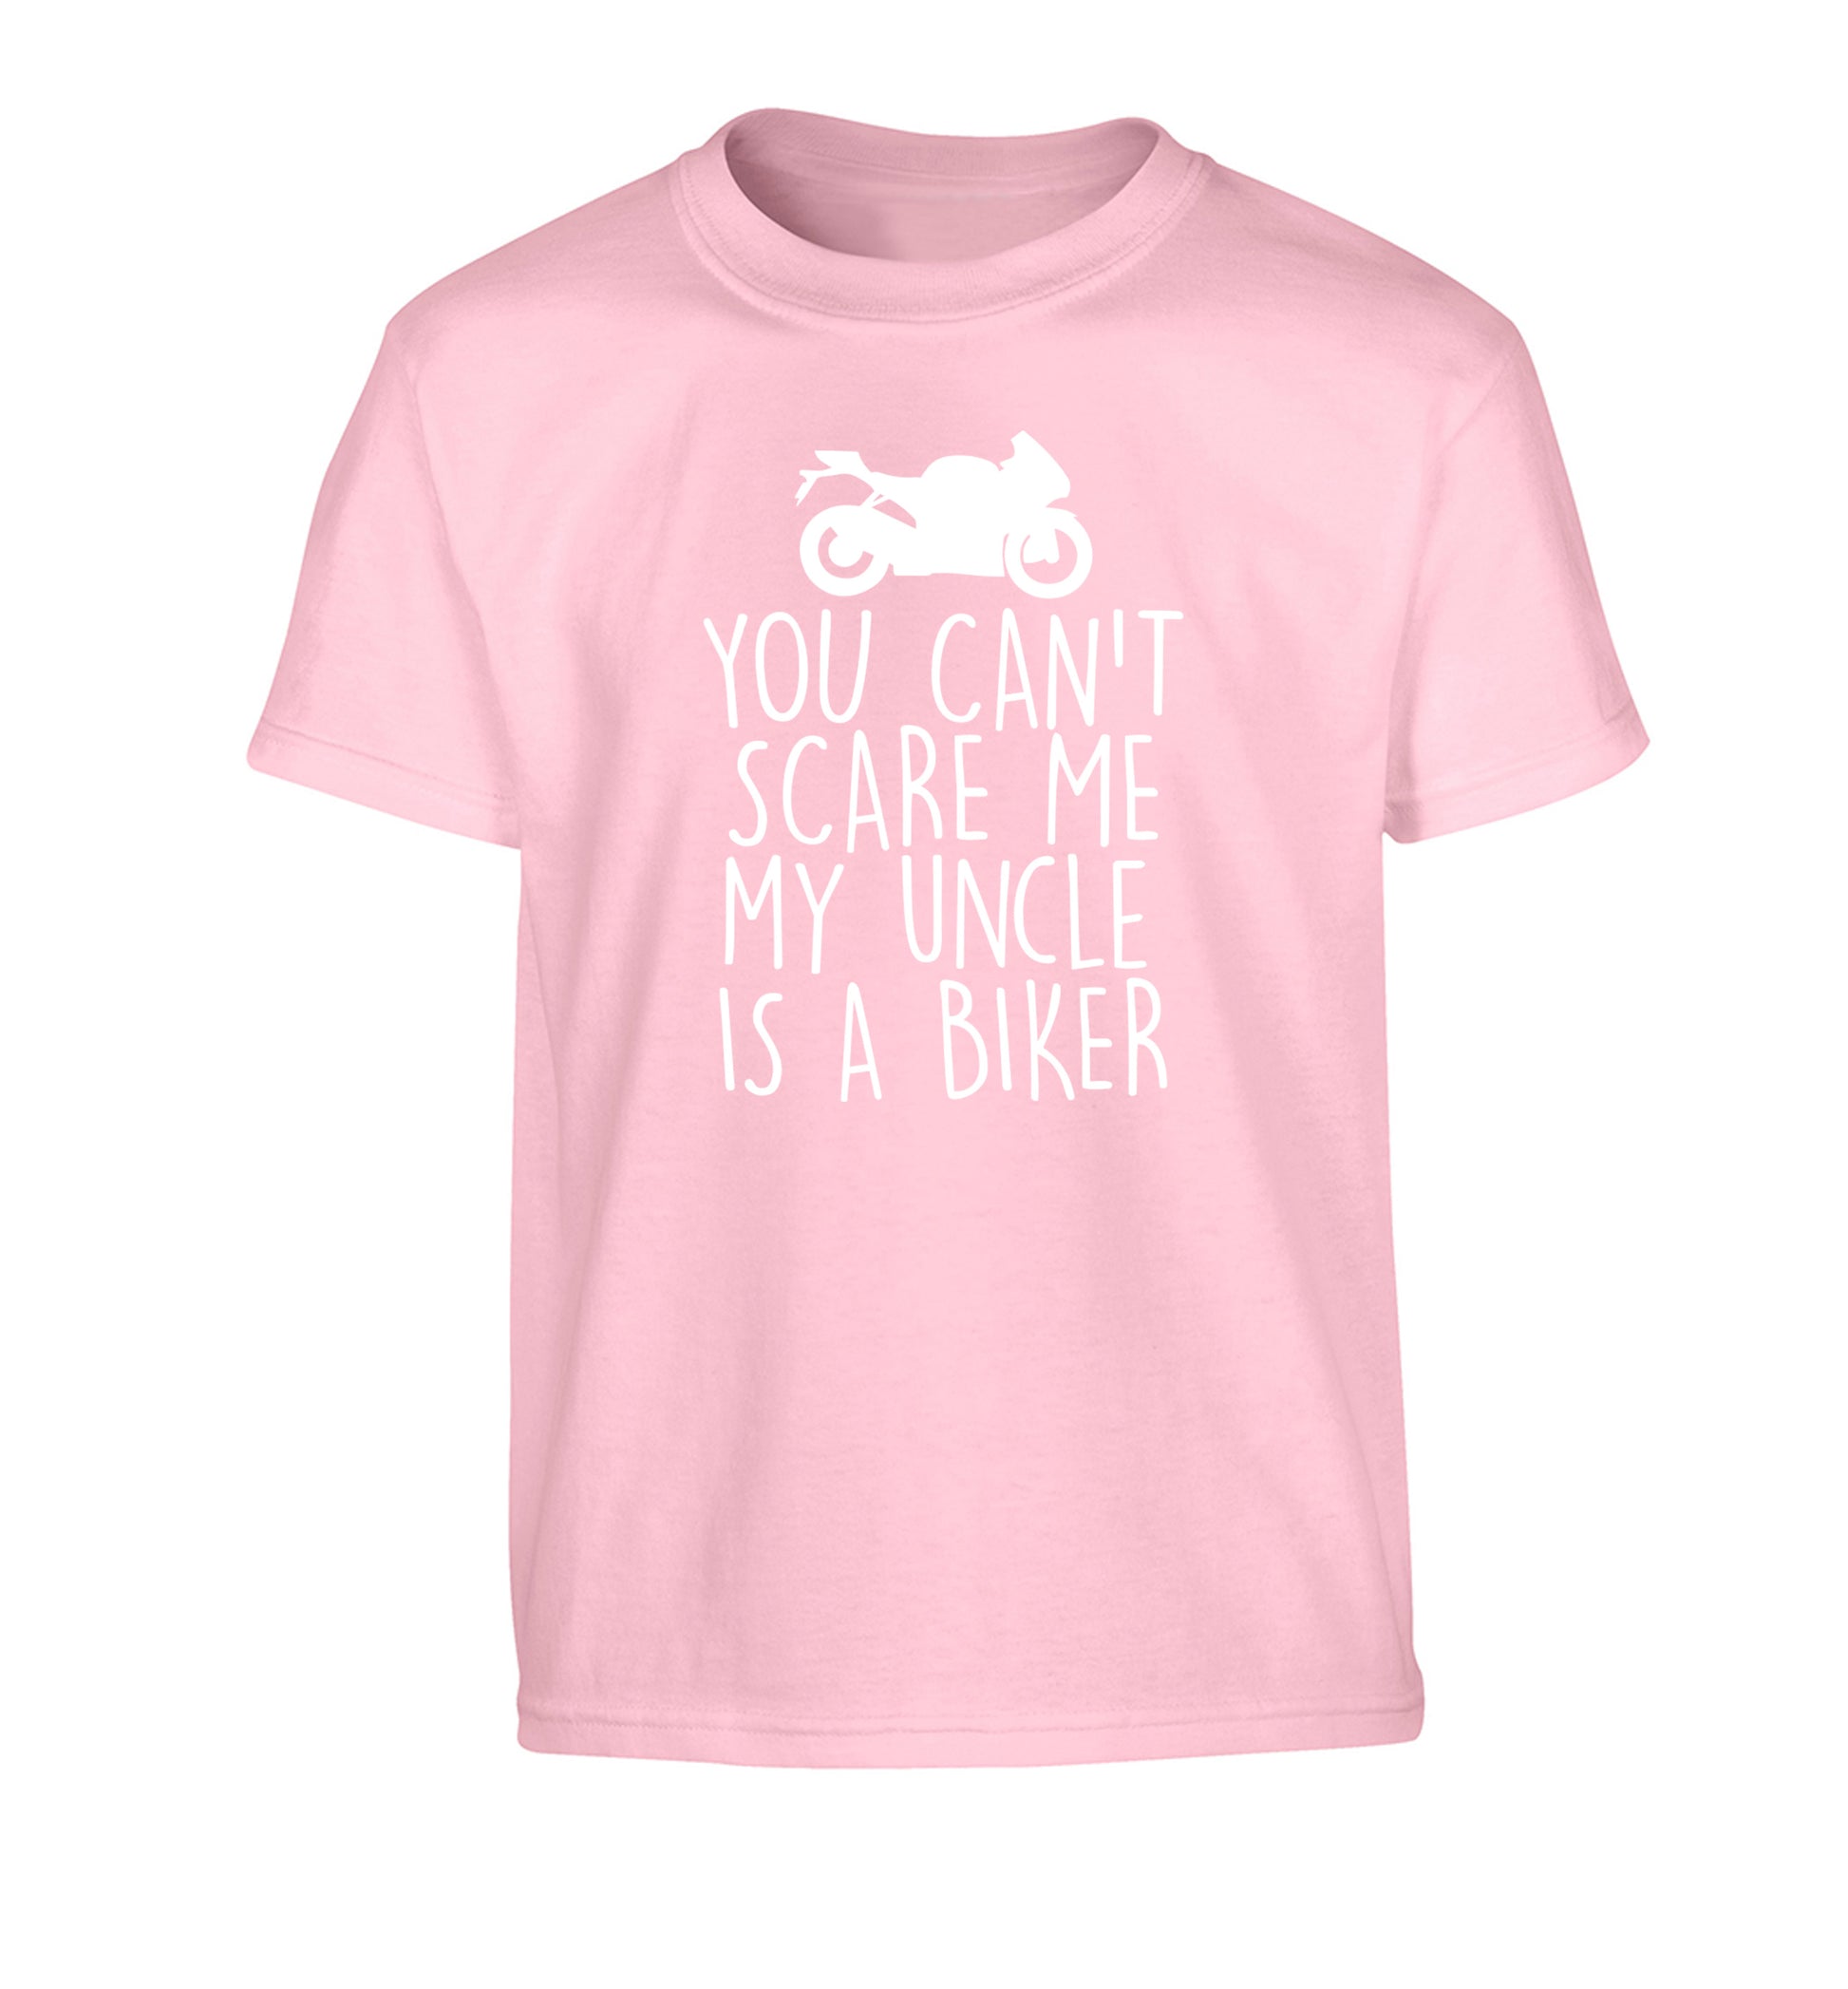 You can't scare me my uncle is a biker Children's light pink Tshirt 12-13 Years